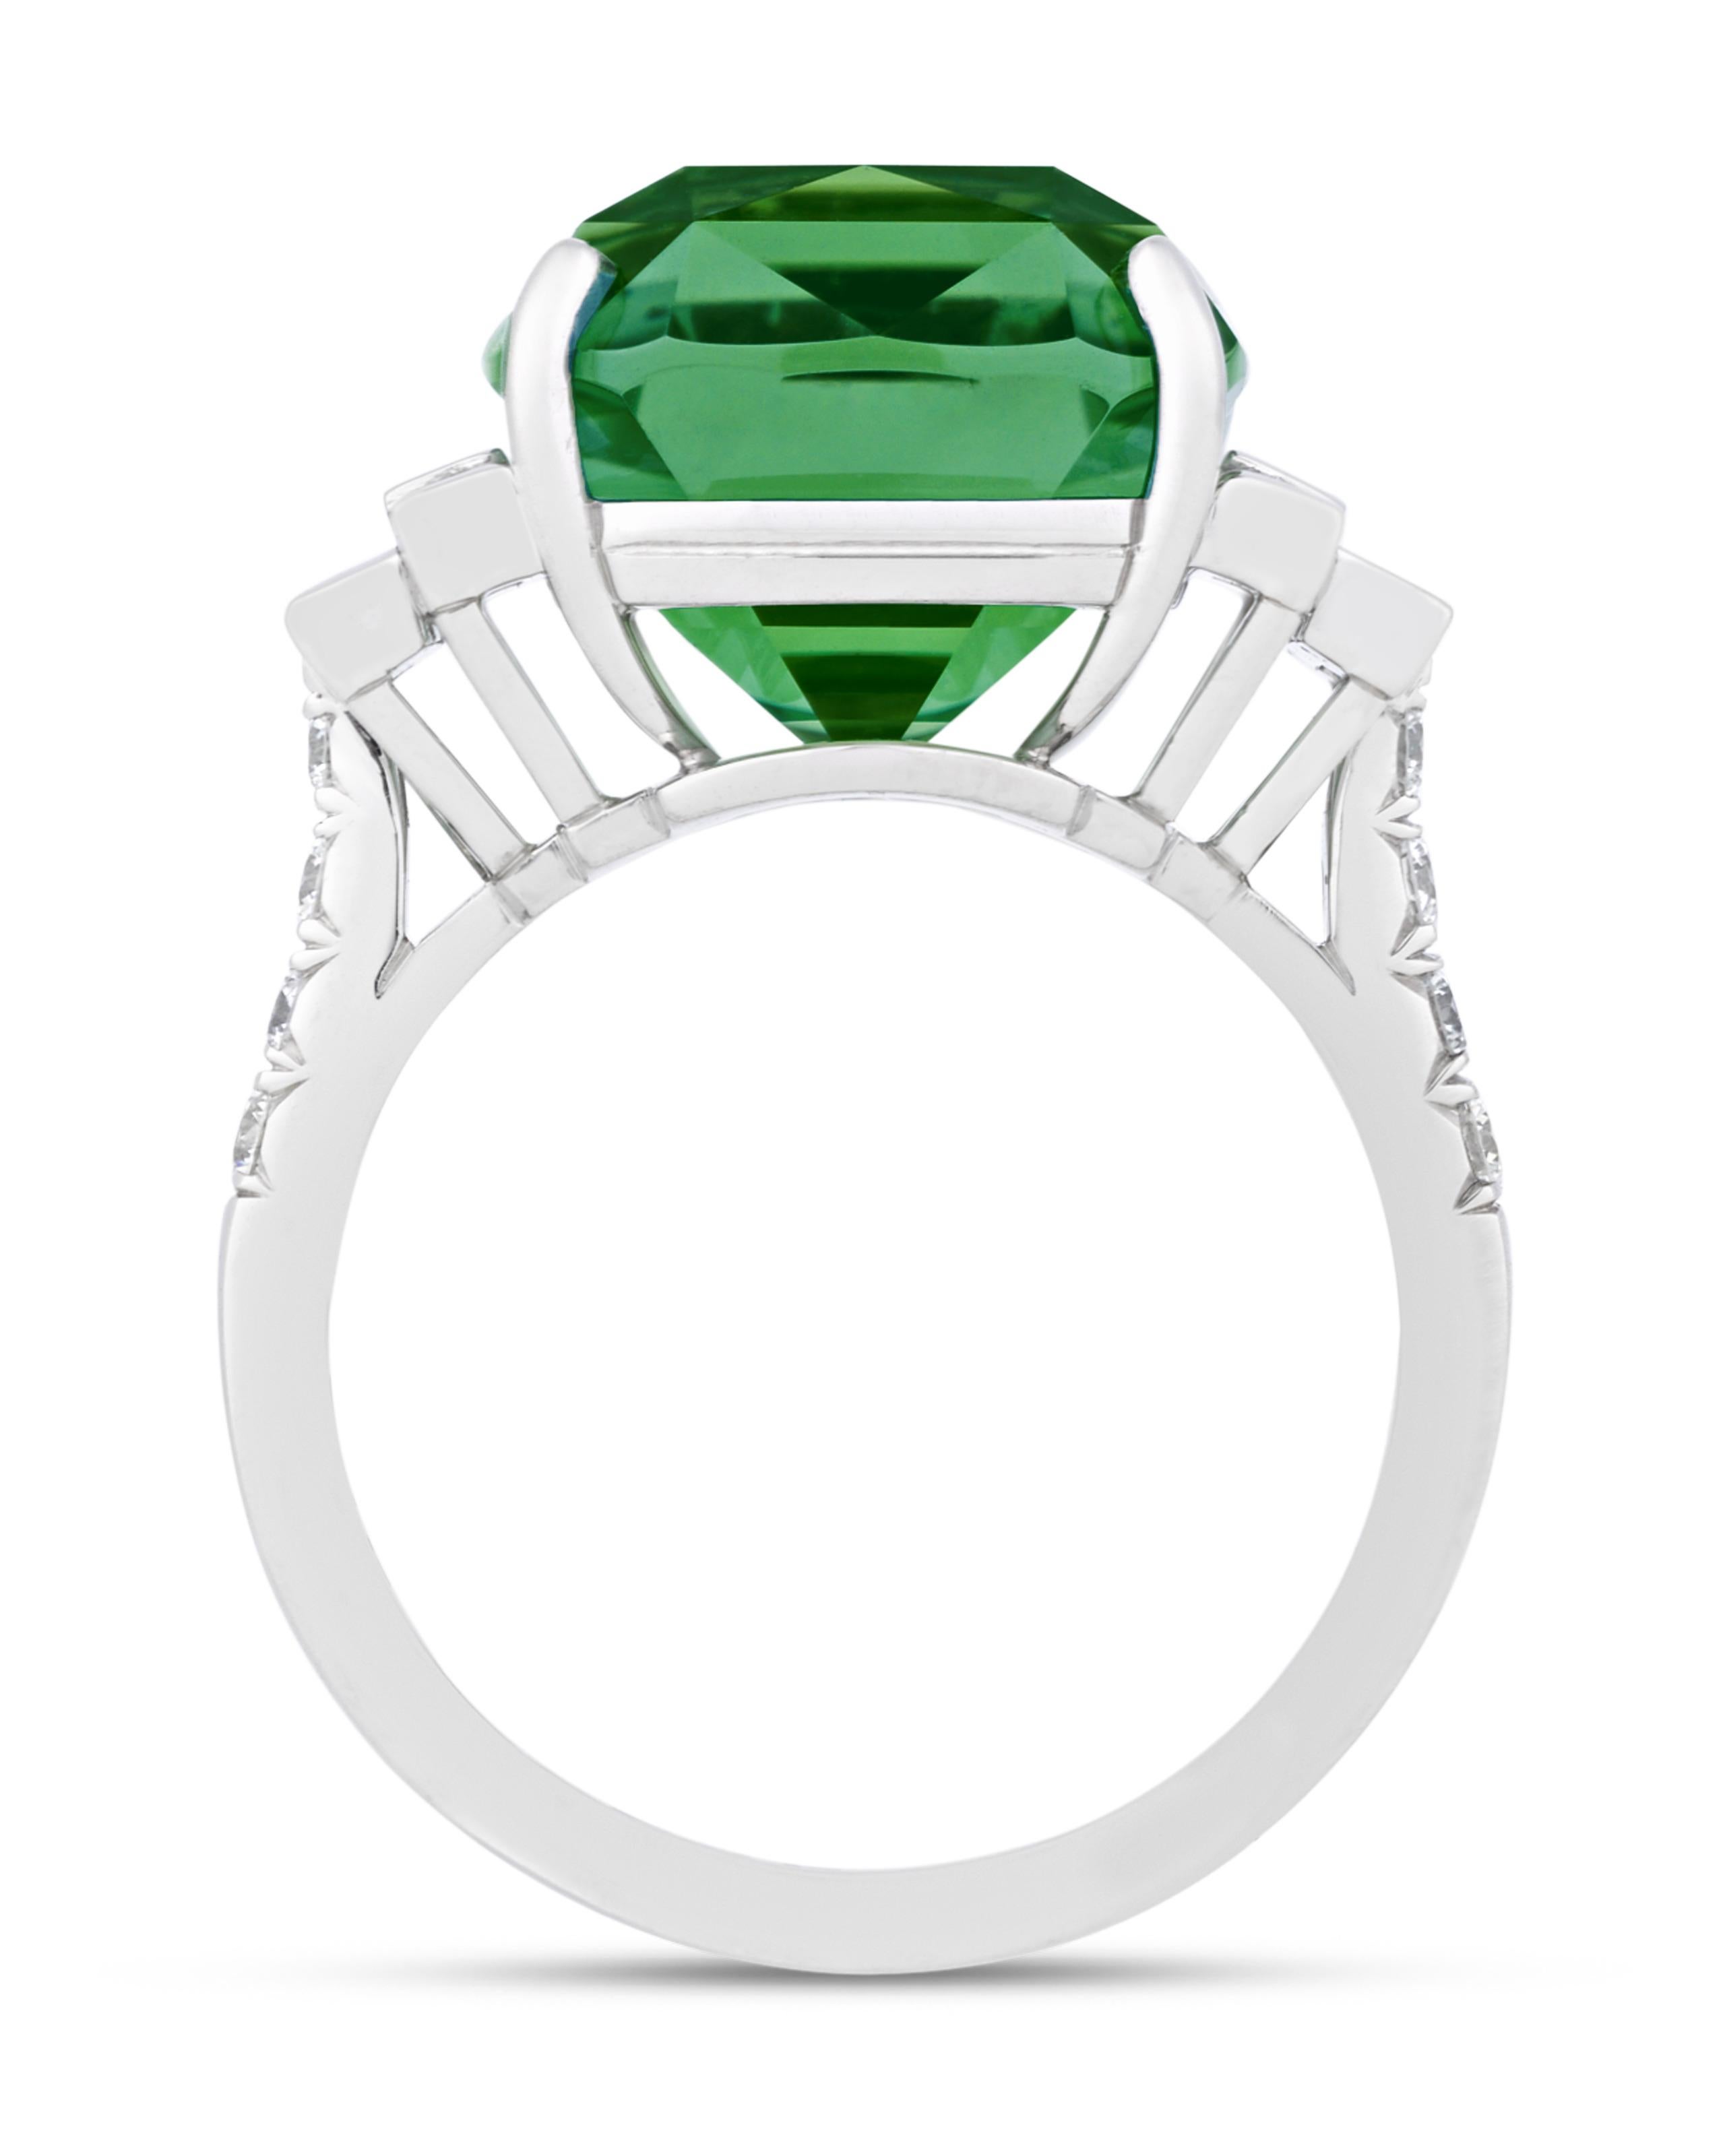 Certified as possessing a very good quality grade and a deep green hue, a natural mint tourmaline serves as the focal point of this platinum ring. The cushion-cut gem is joined by twelve baguette and round diamonds for a total of 1.07 carats.

M.S.